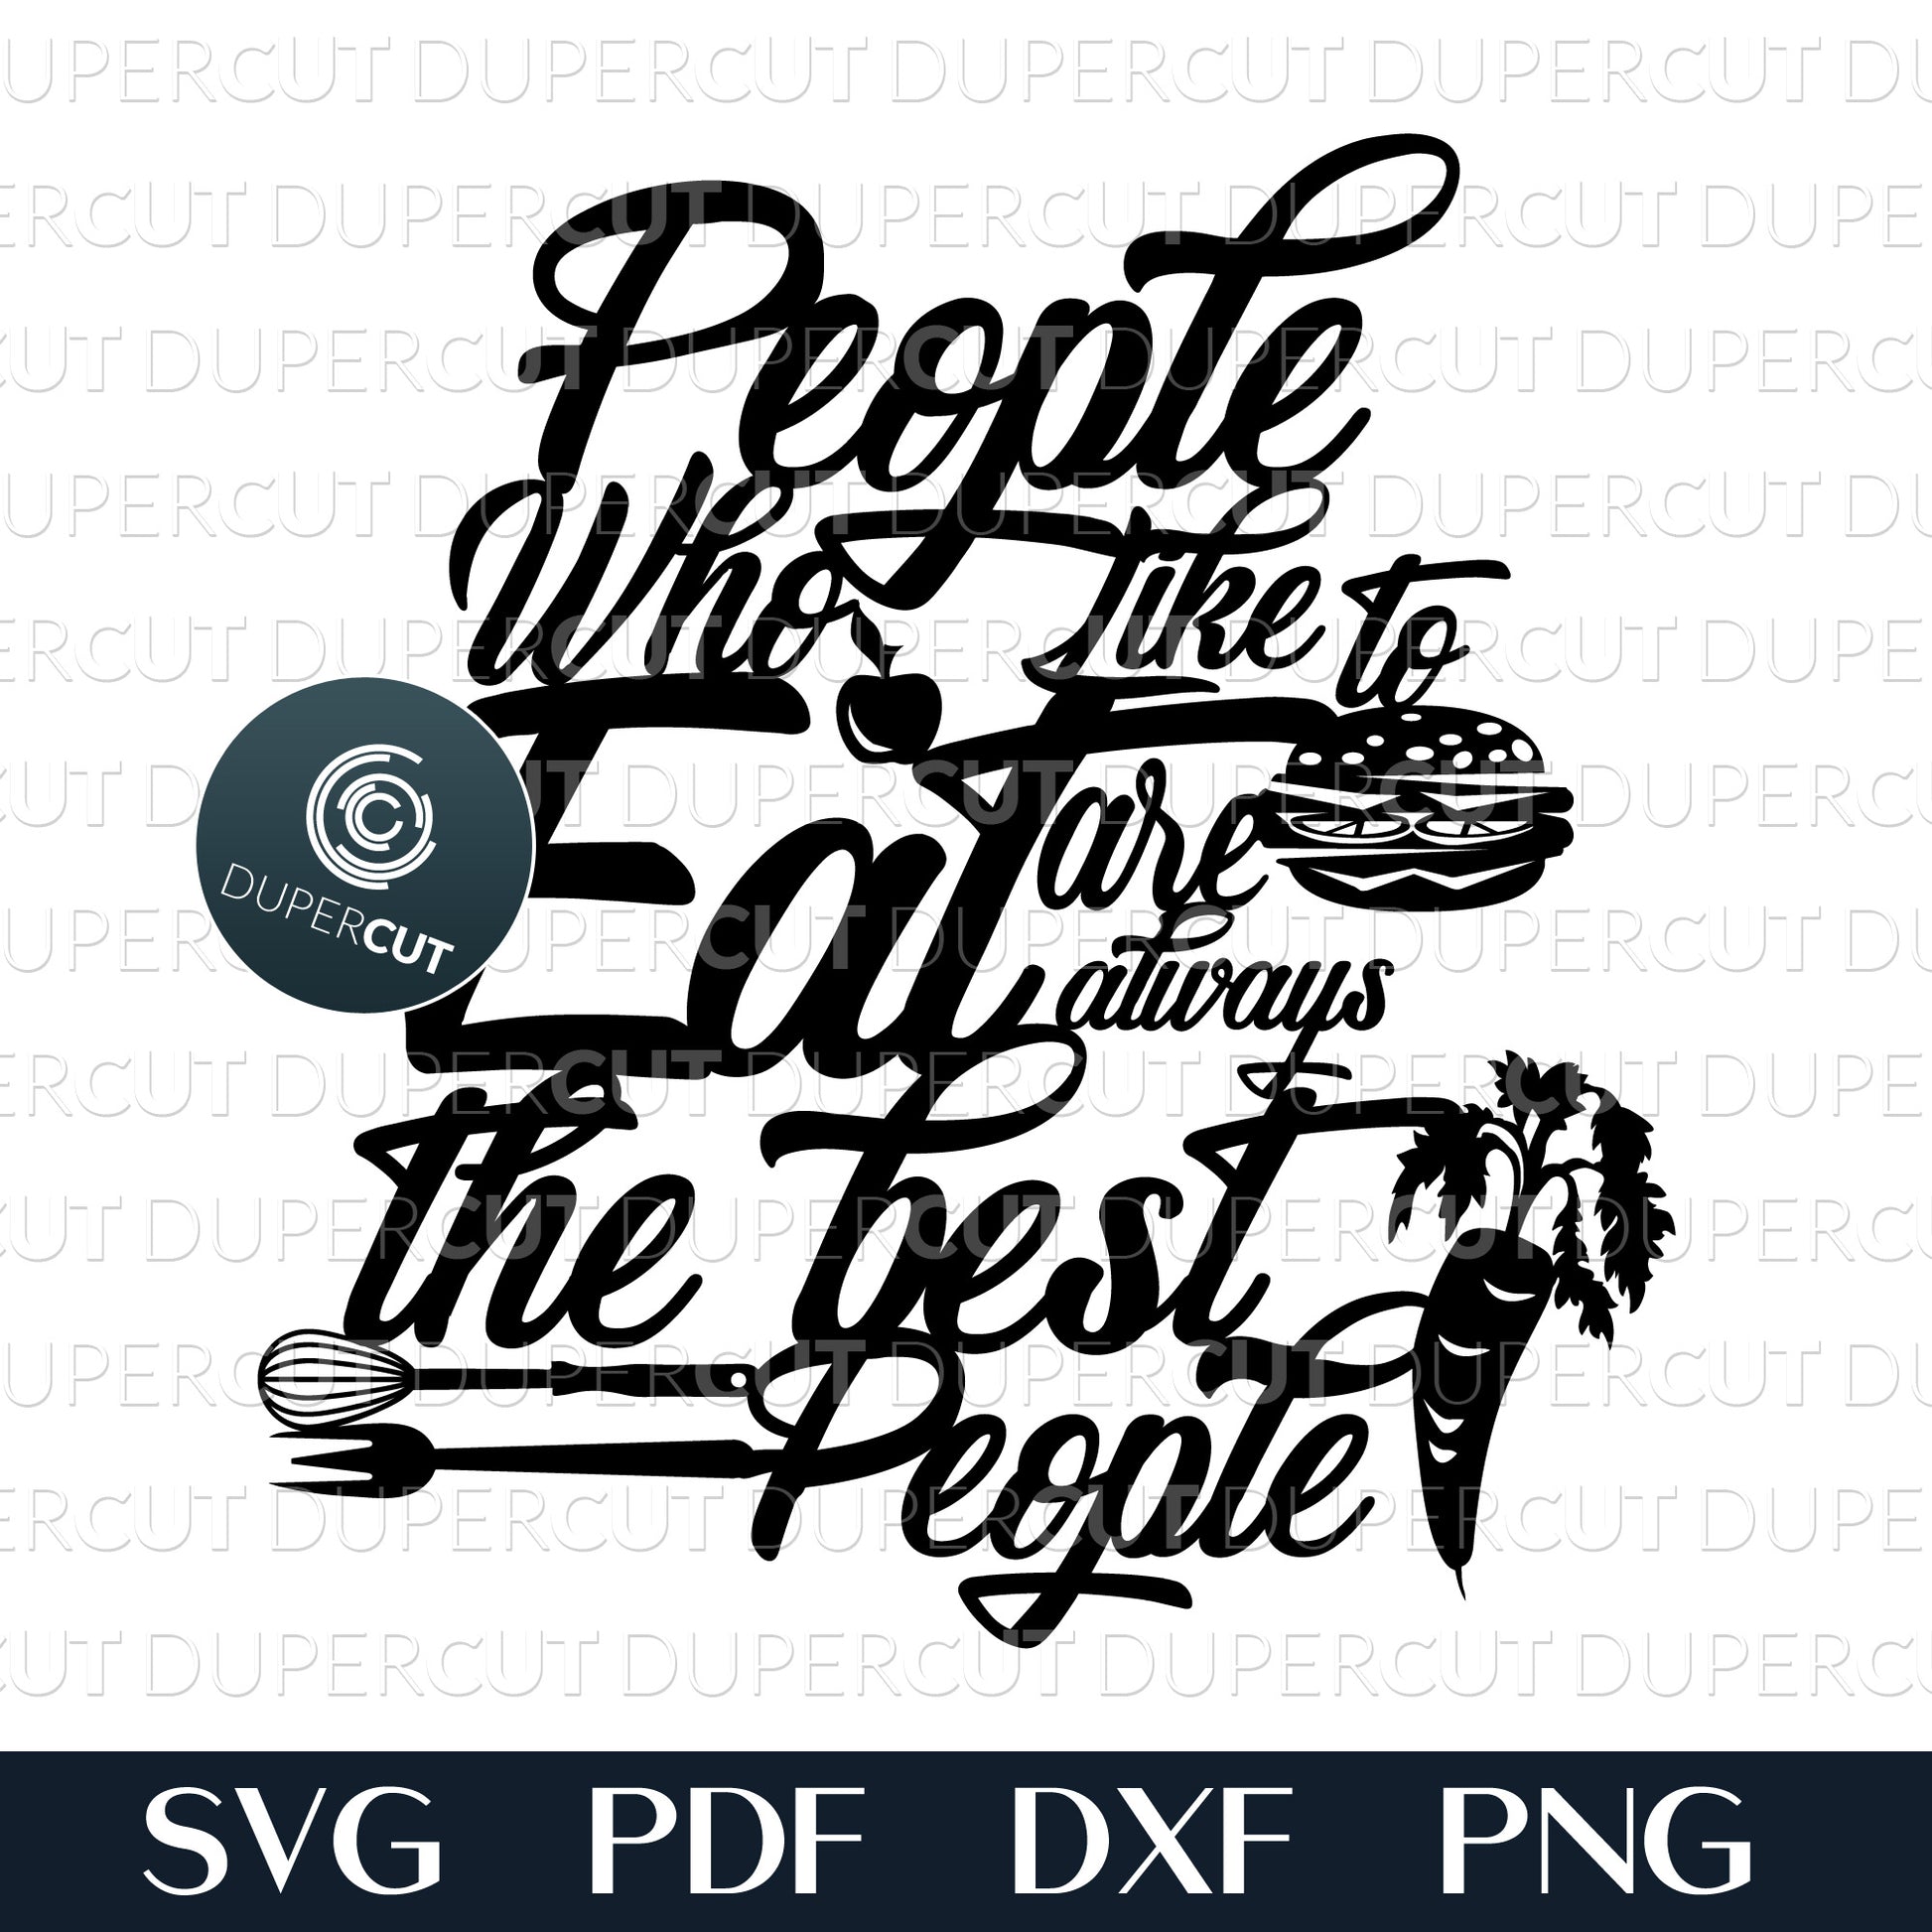 Kitchen quote - people who like to eat are always the best people - SVG PDF DXF vector files for cutting, engraving, Cricut, Glowforge, Silhouette Cameo